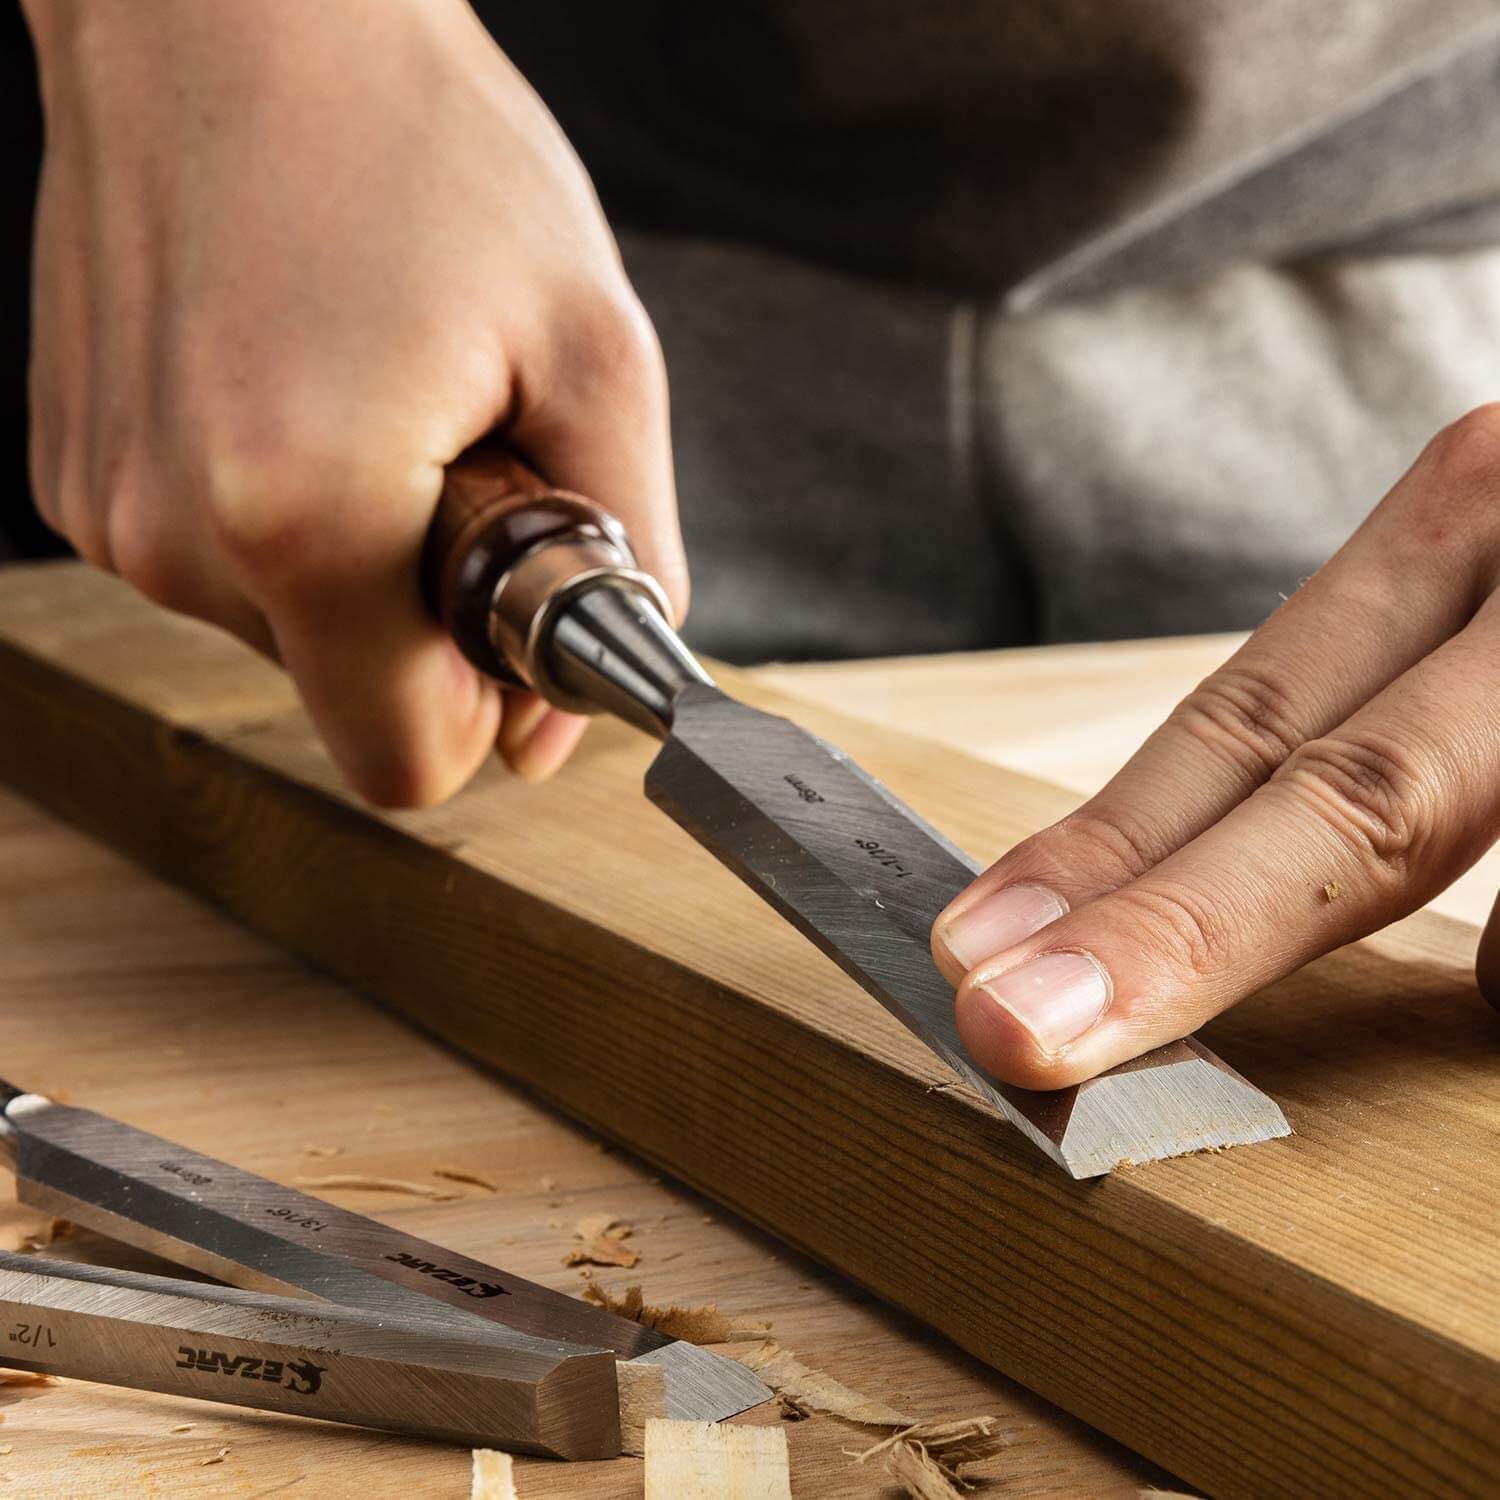 Best Chisels for Woodworking: The Pro's Choice 